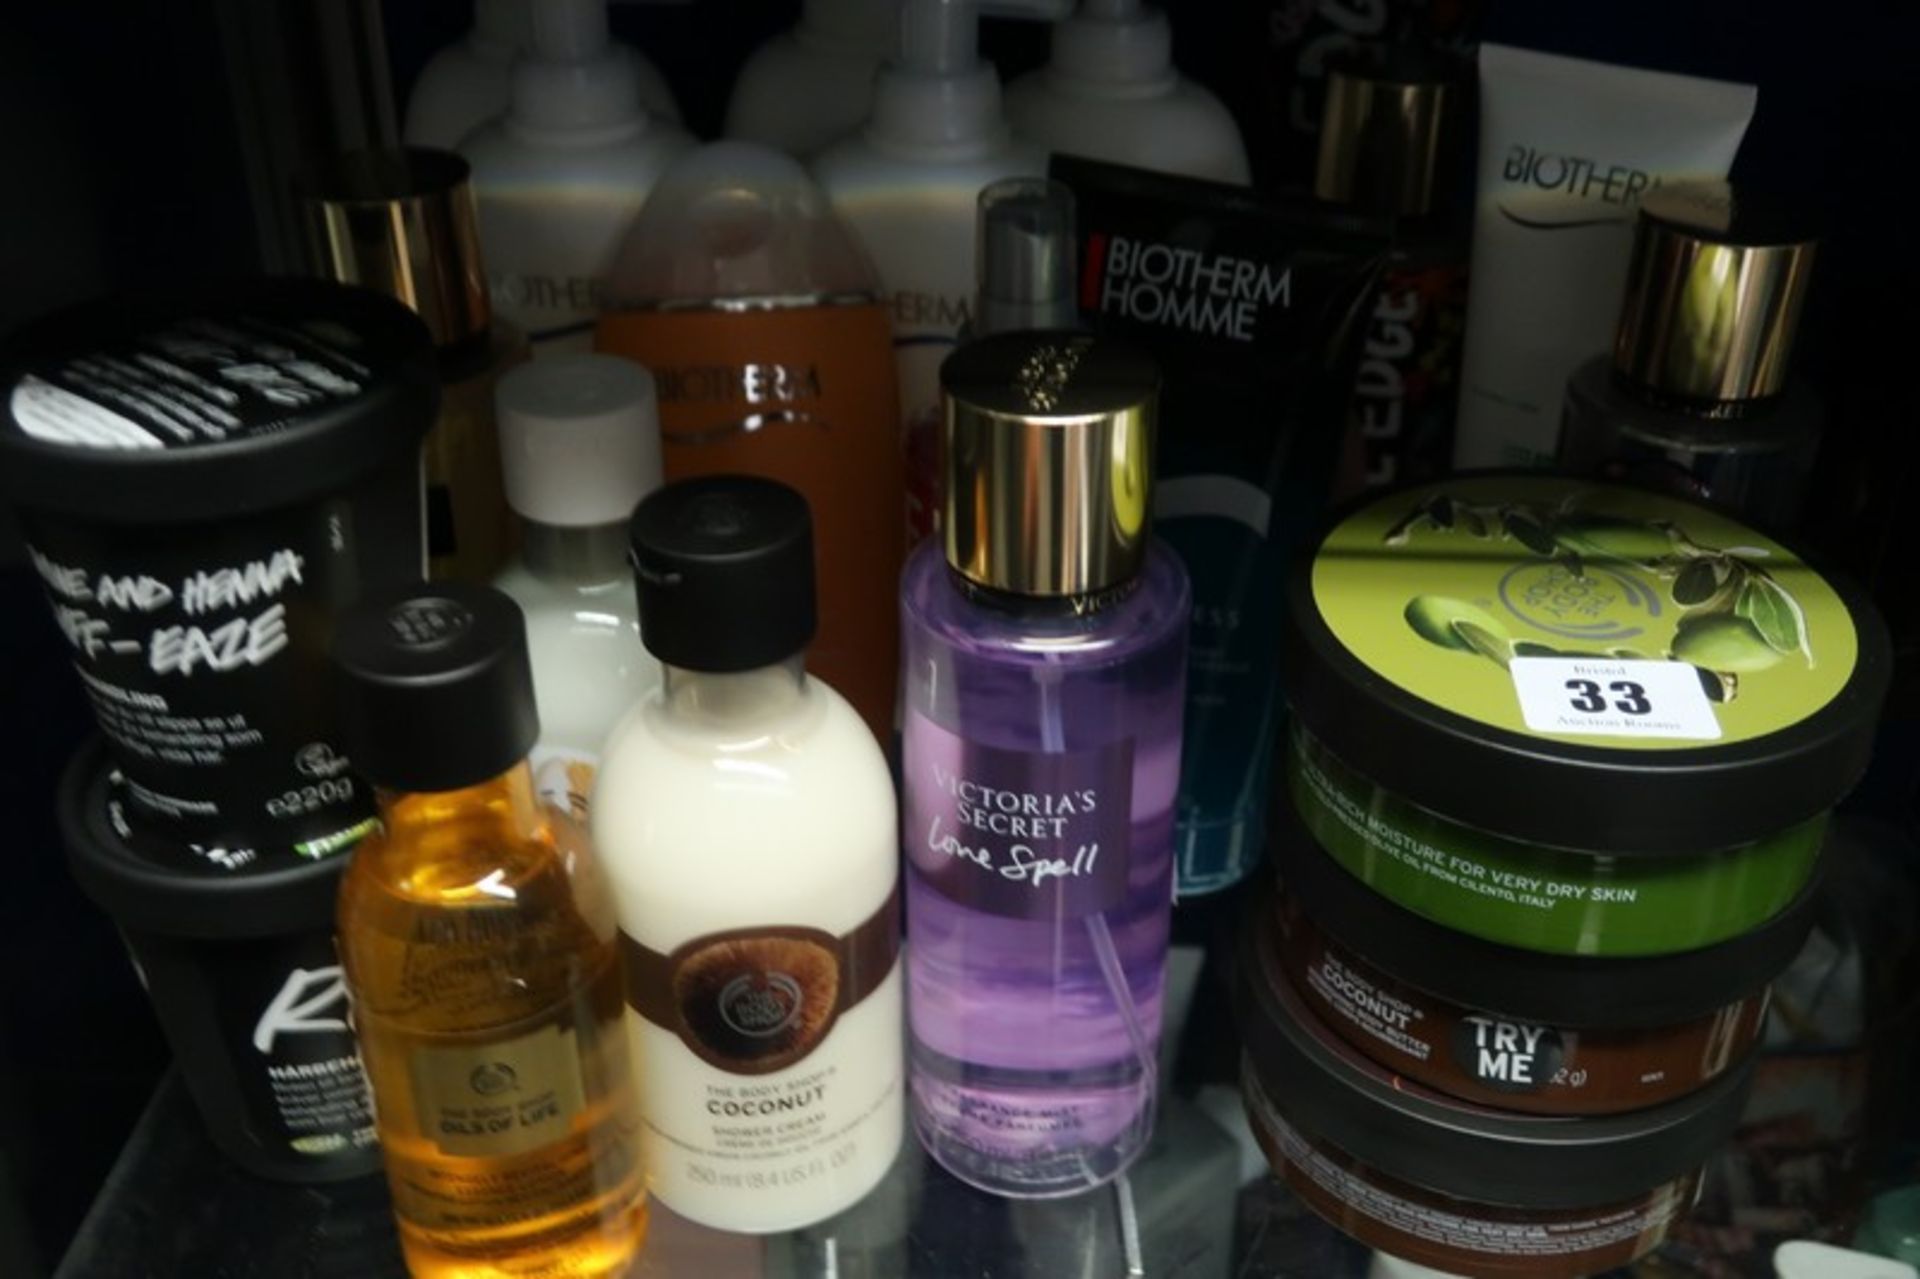 A quantity of beauty products to include Body Shop, Lush, Biotherm, Victoria's Secret (Approximately